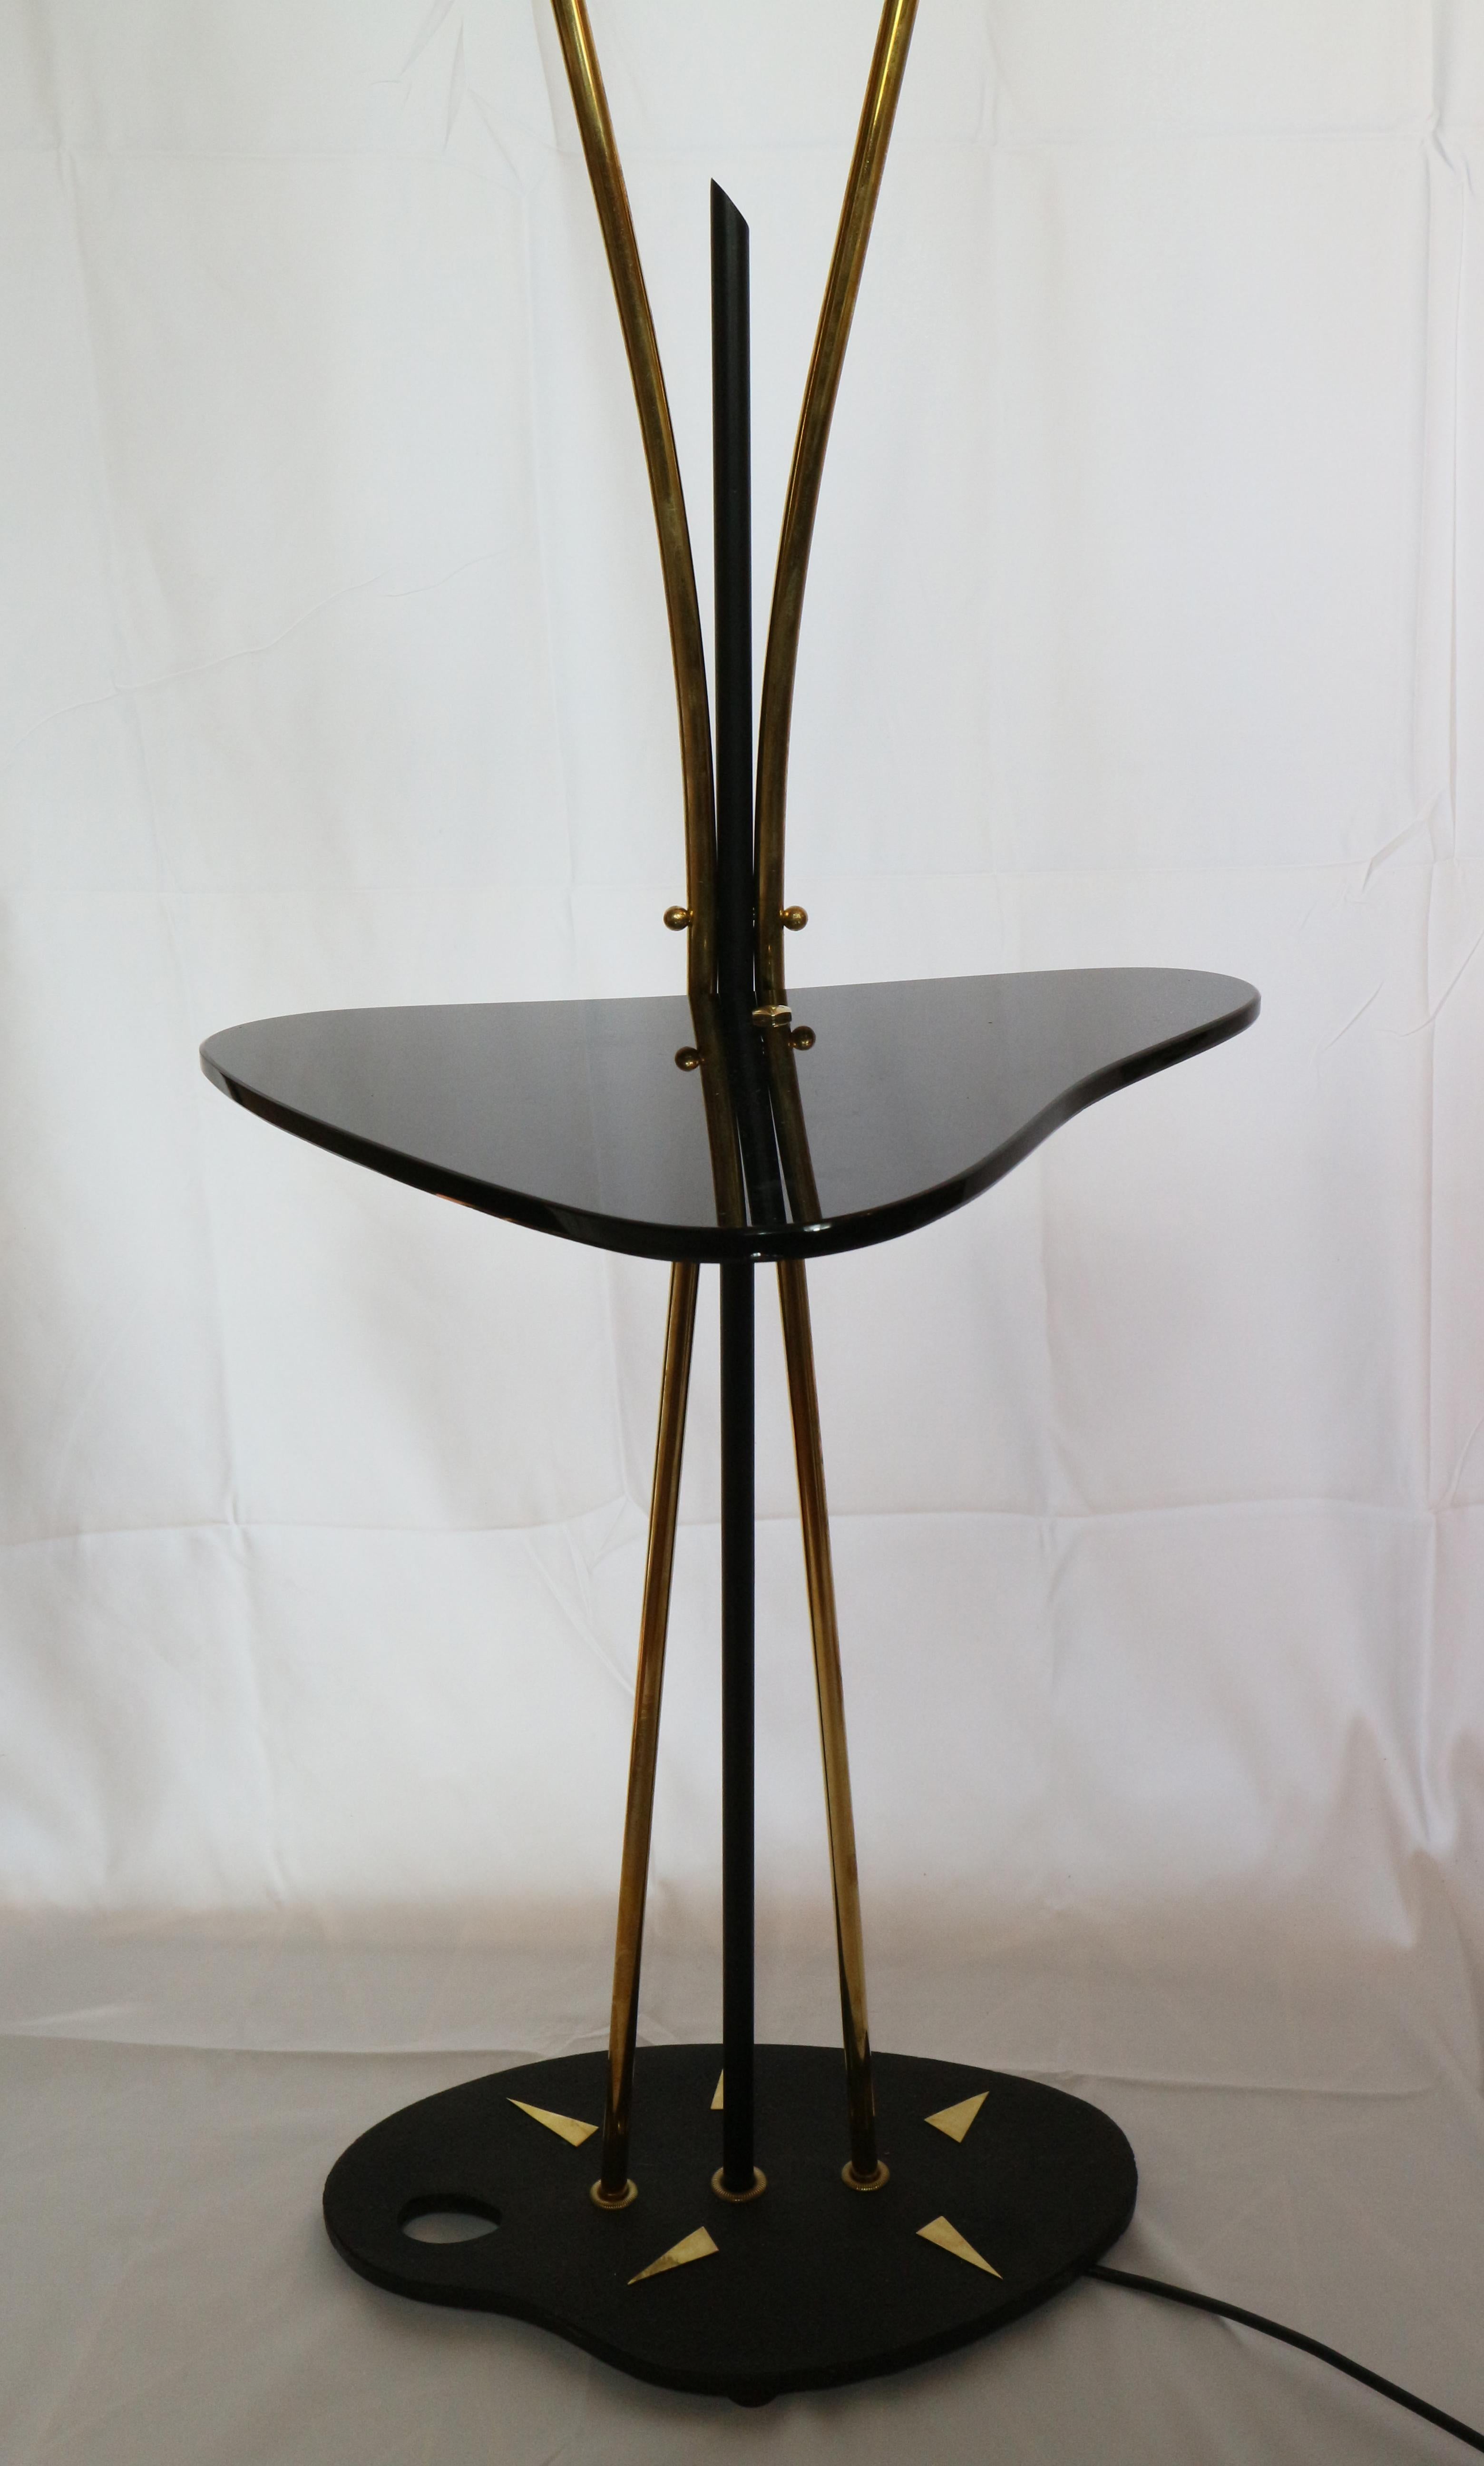 Decorative 1950's circa two head french brass floor lamp with a black glass detail.

We remain at your complete disposal for any other needs.

Lustri -
Italy